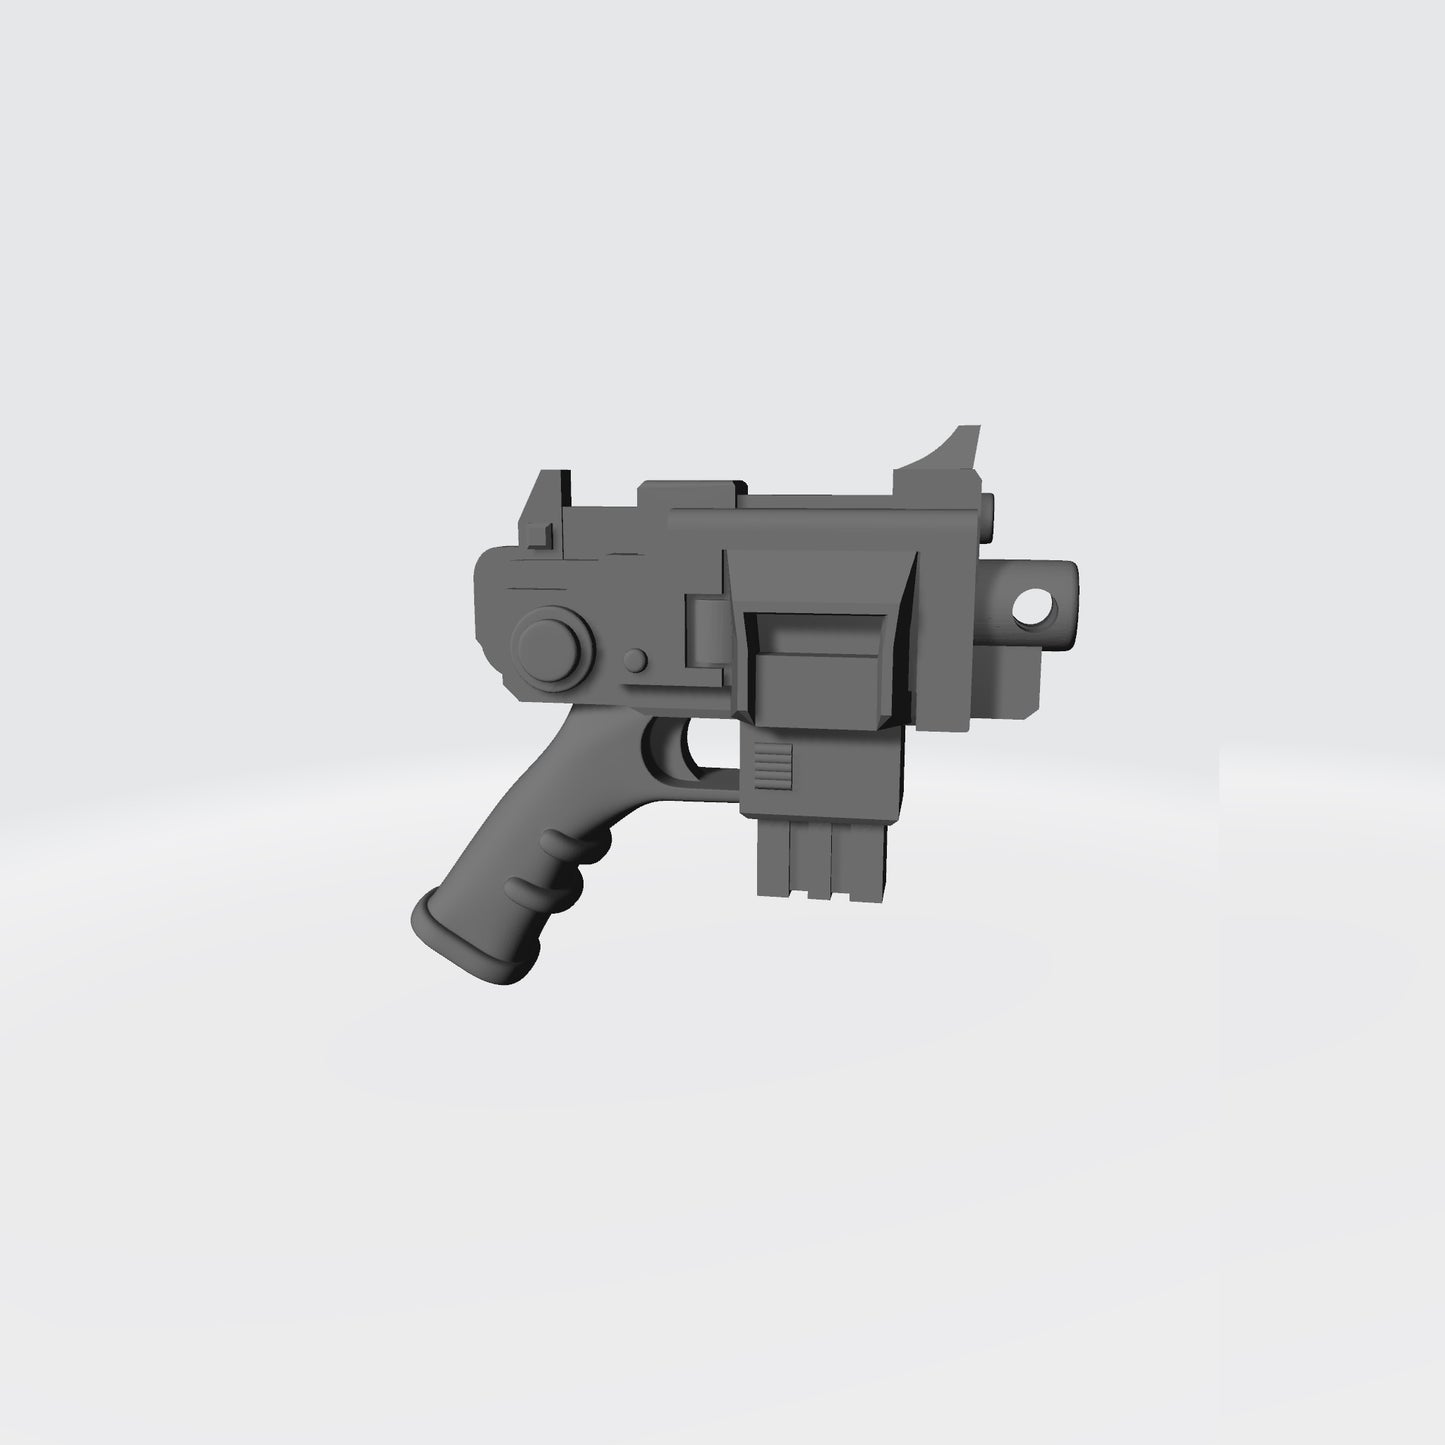 Bolt Pistol compatible with JoyToy Space Marine Action Figures by 18th Scale Armory